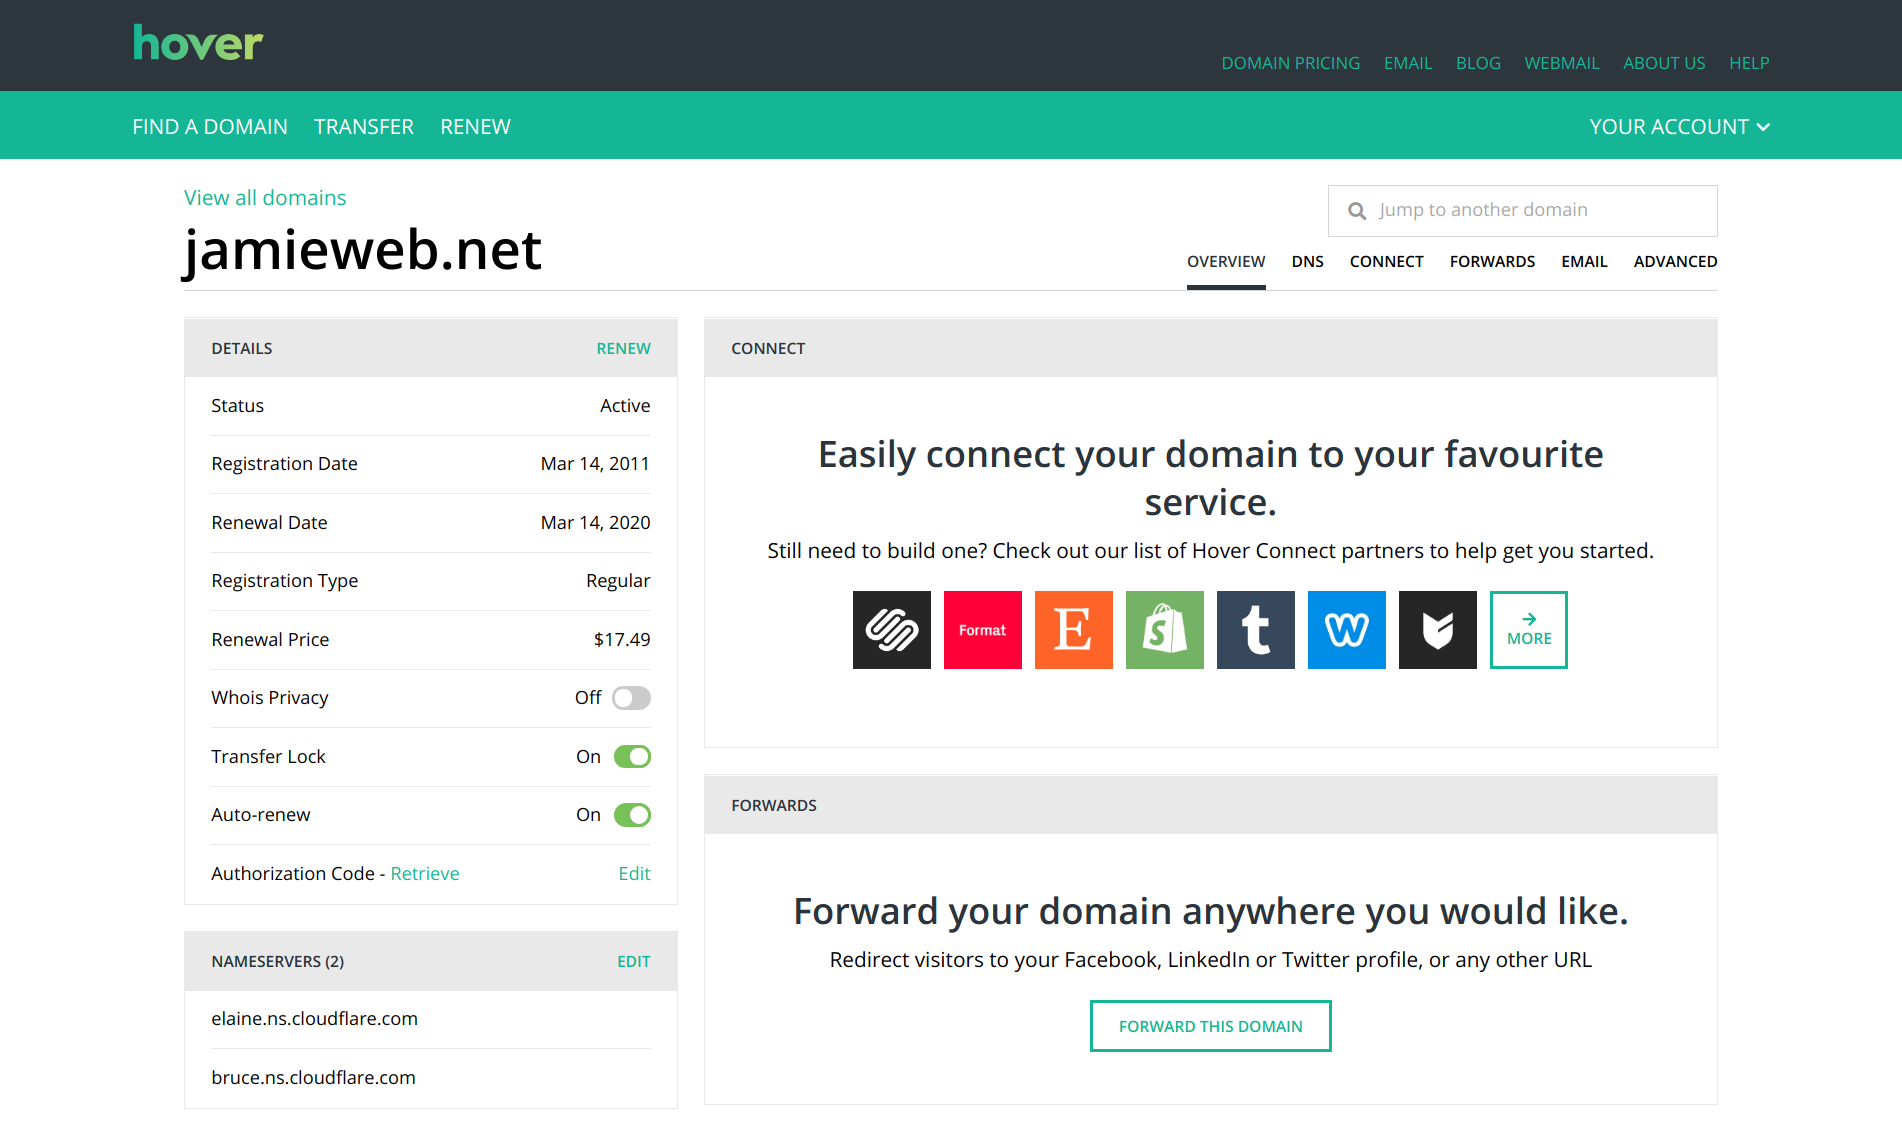 A screenshot of the Hover dashboard for jamieweb.net.